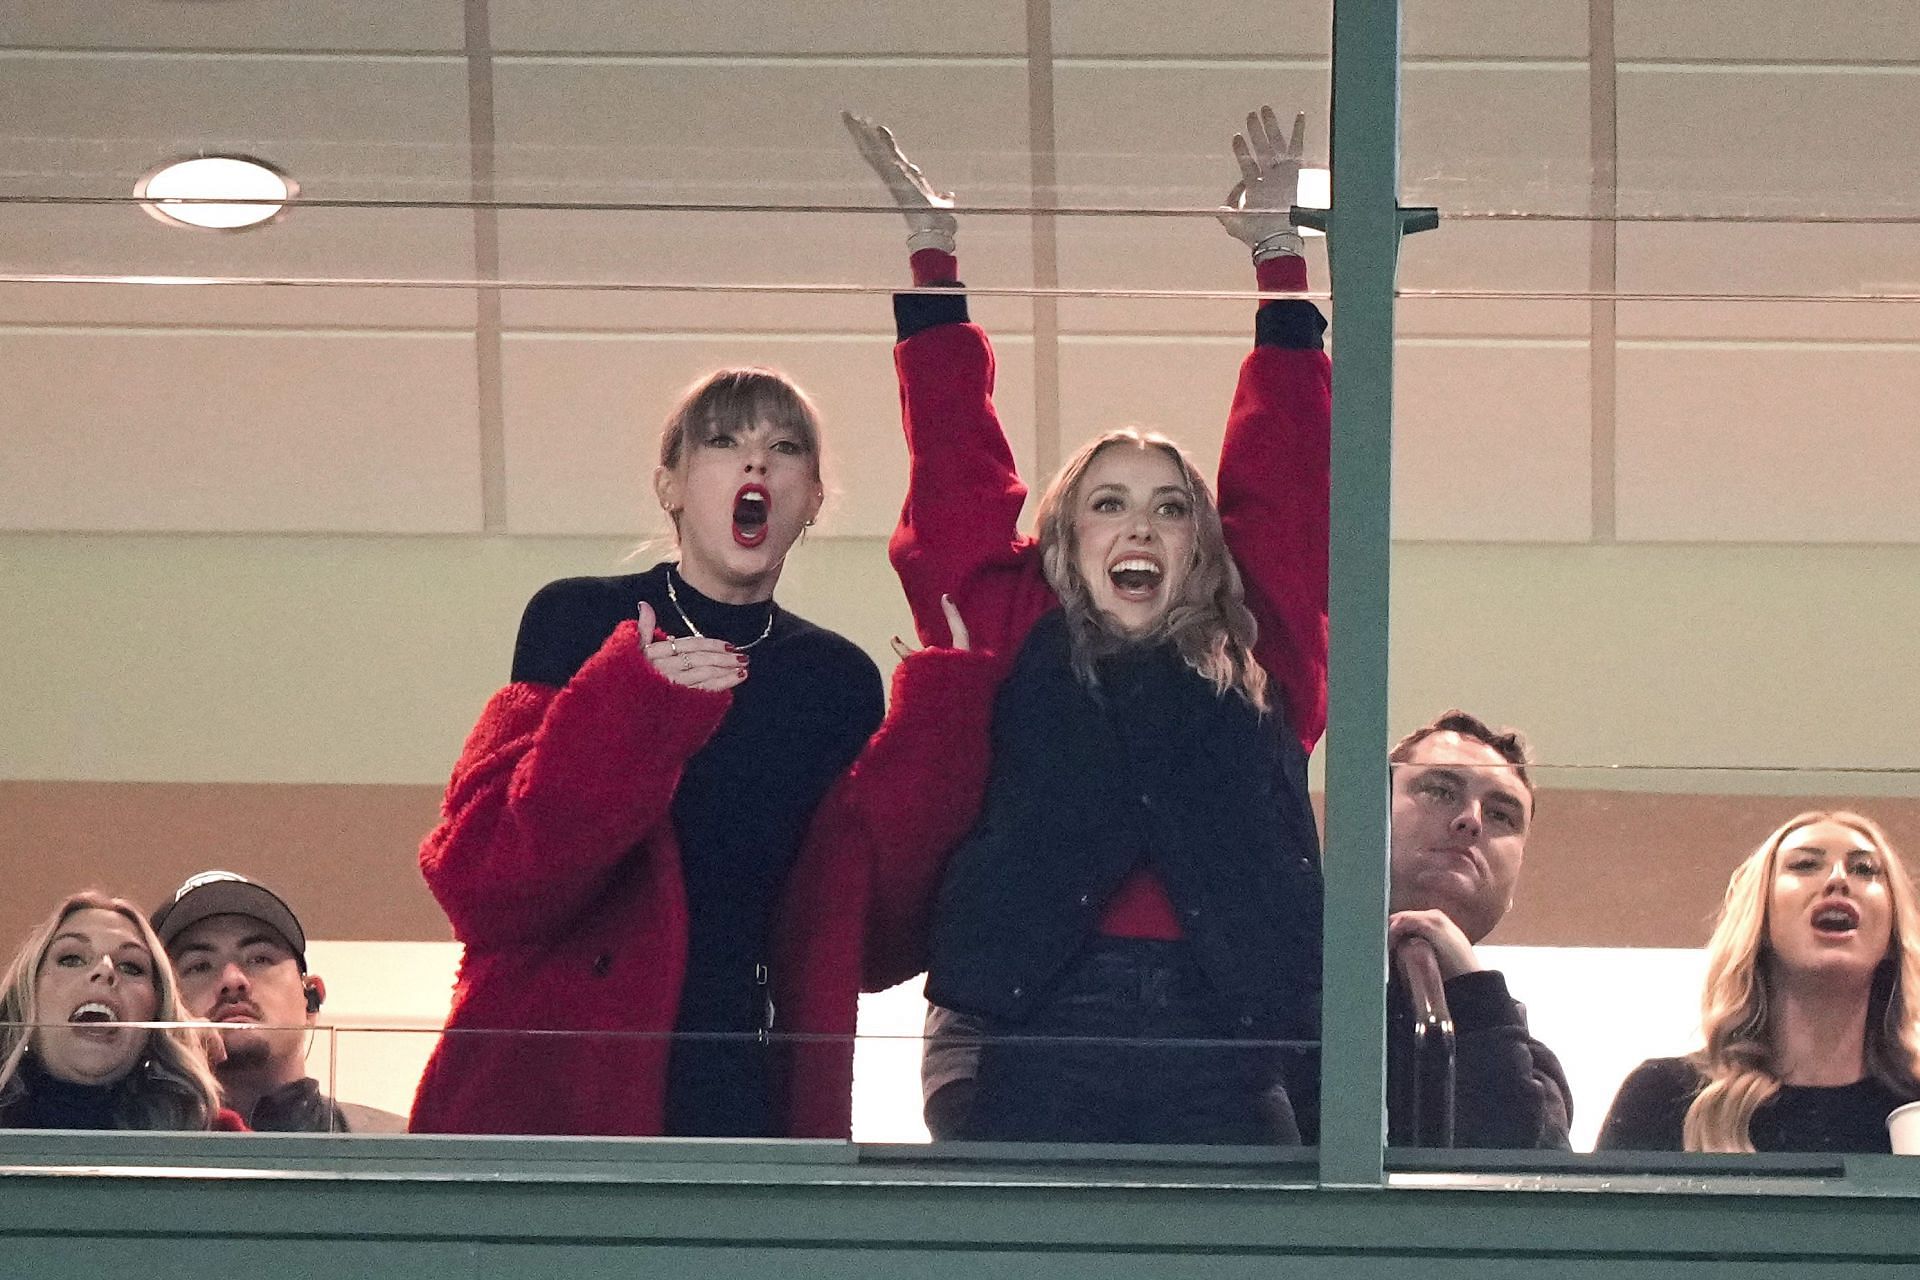 Taylor Swift and Brittany Mahomes watching the game